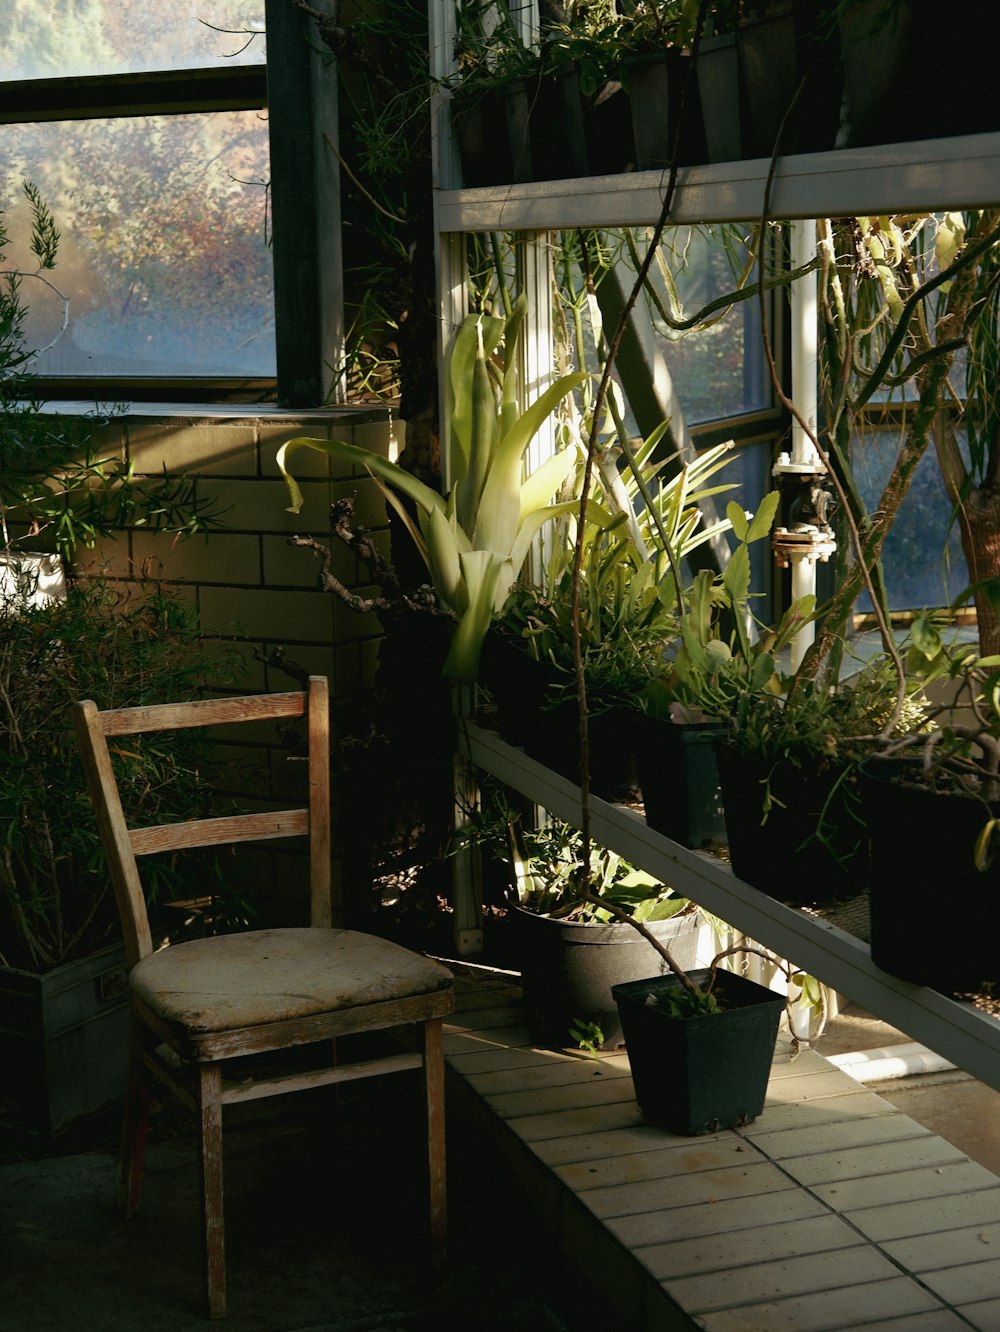 a wooden chair sitting on a porch next to potted plants